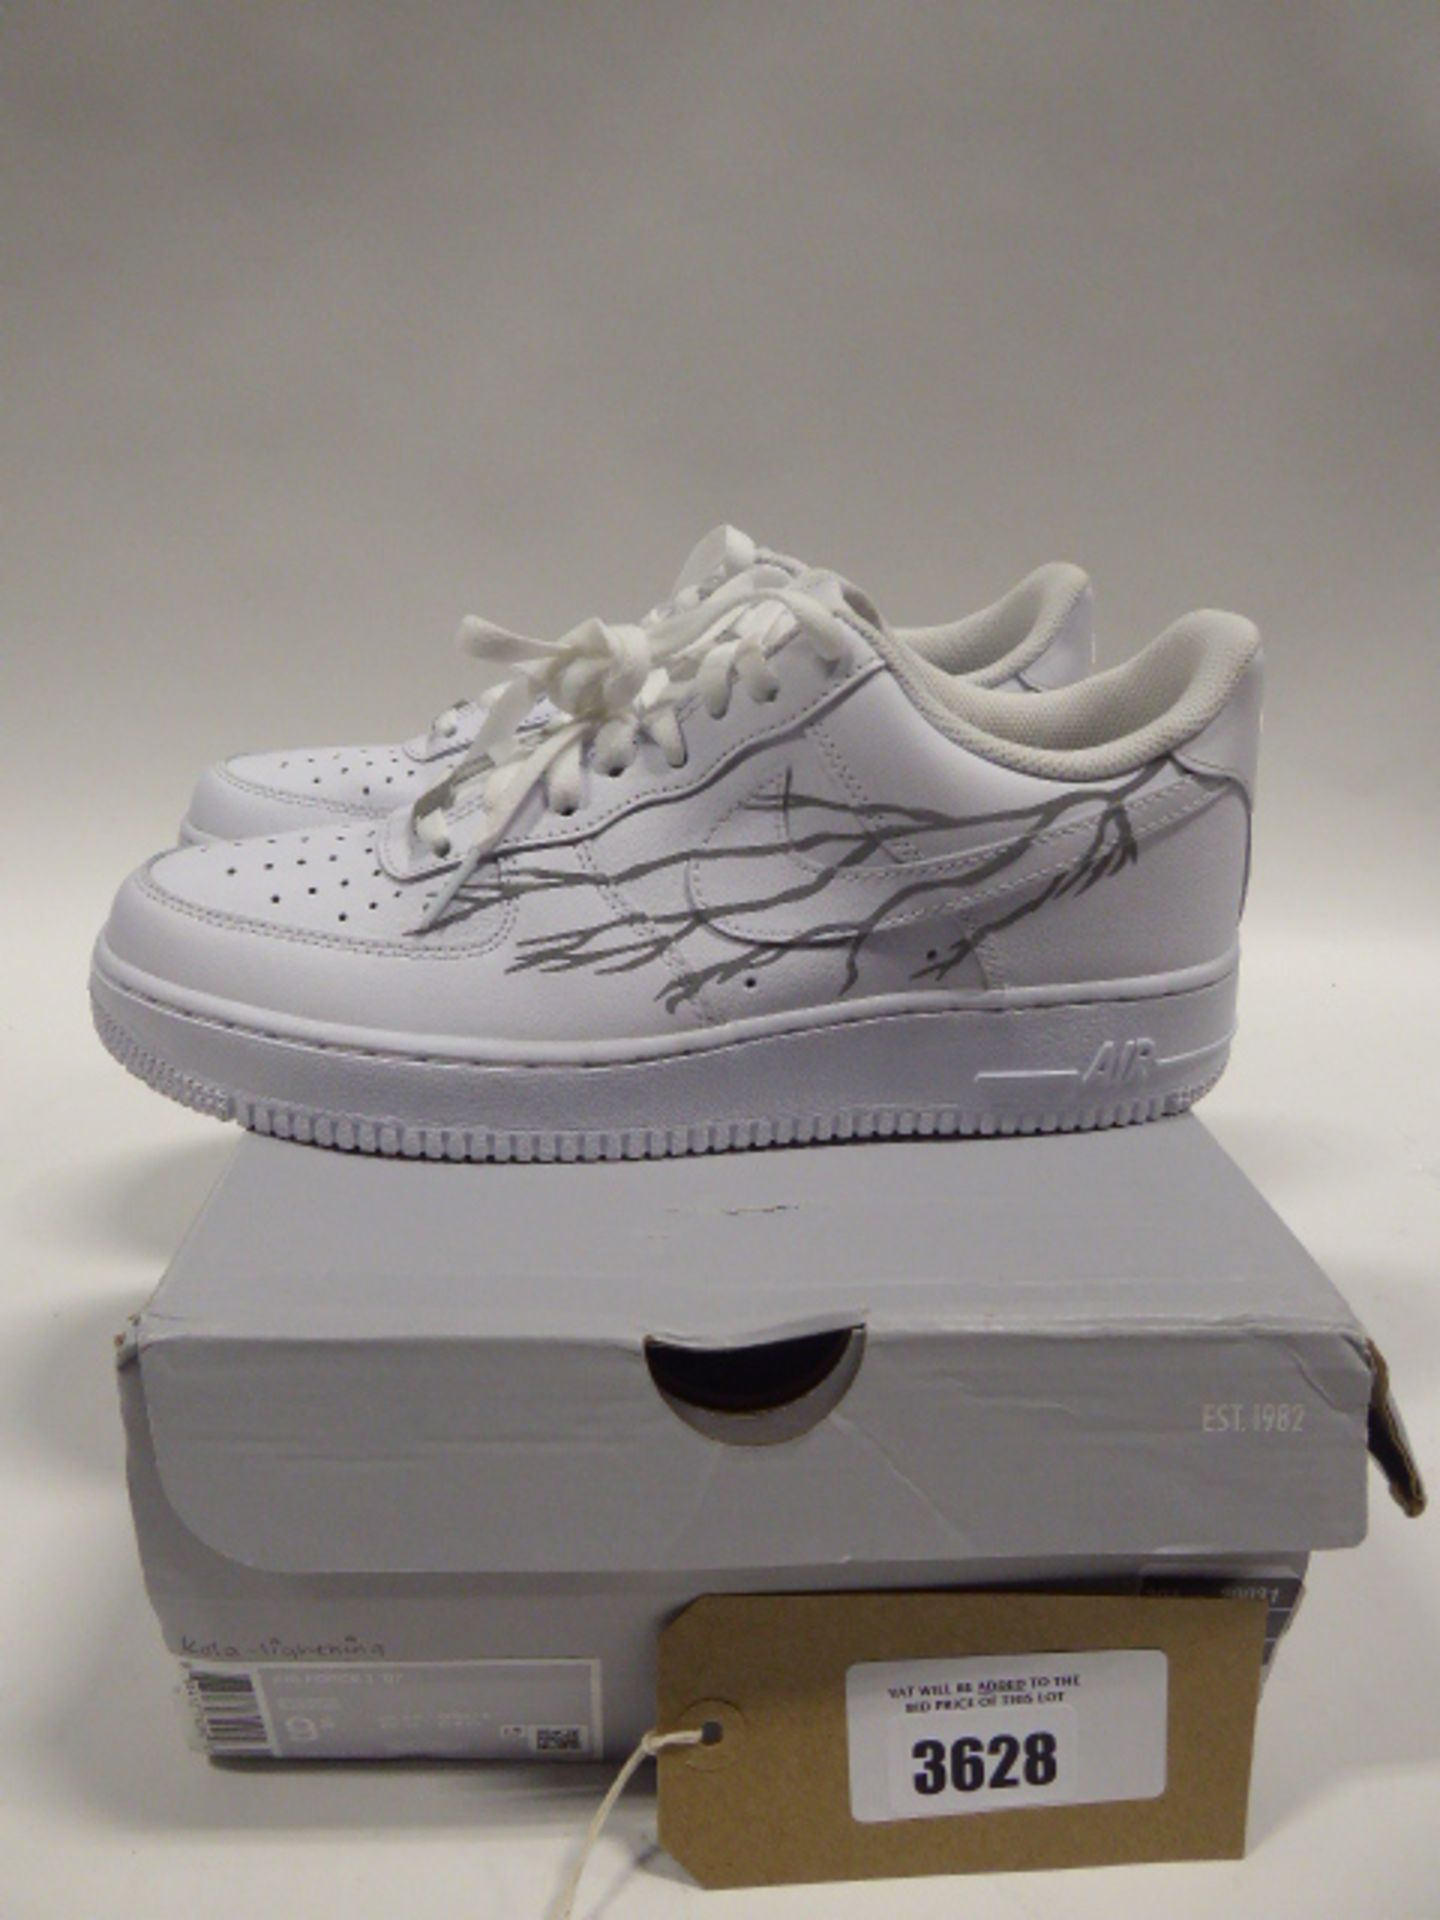 Nike Air Force 1 '07 size 8.5